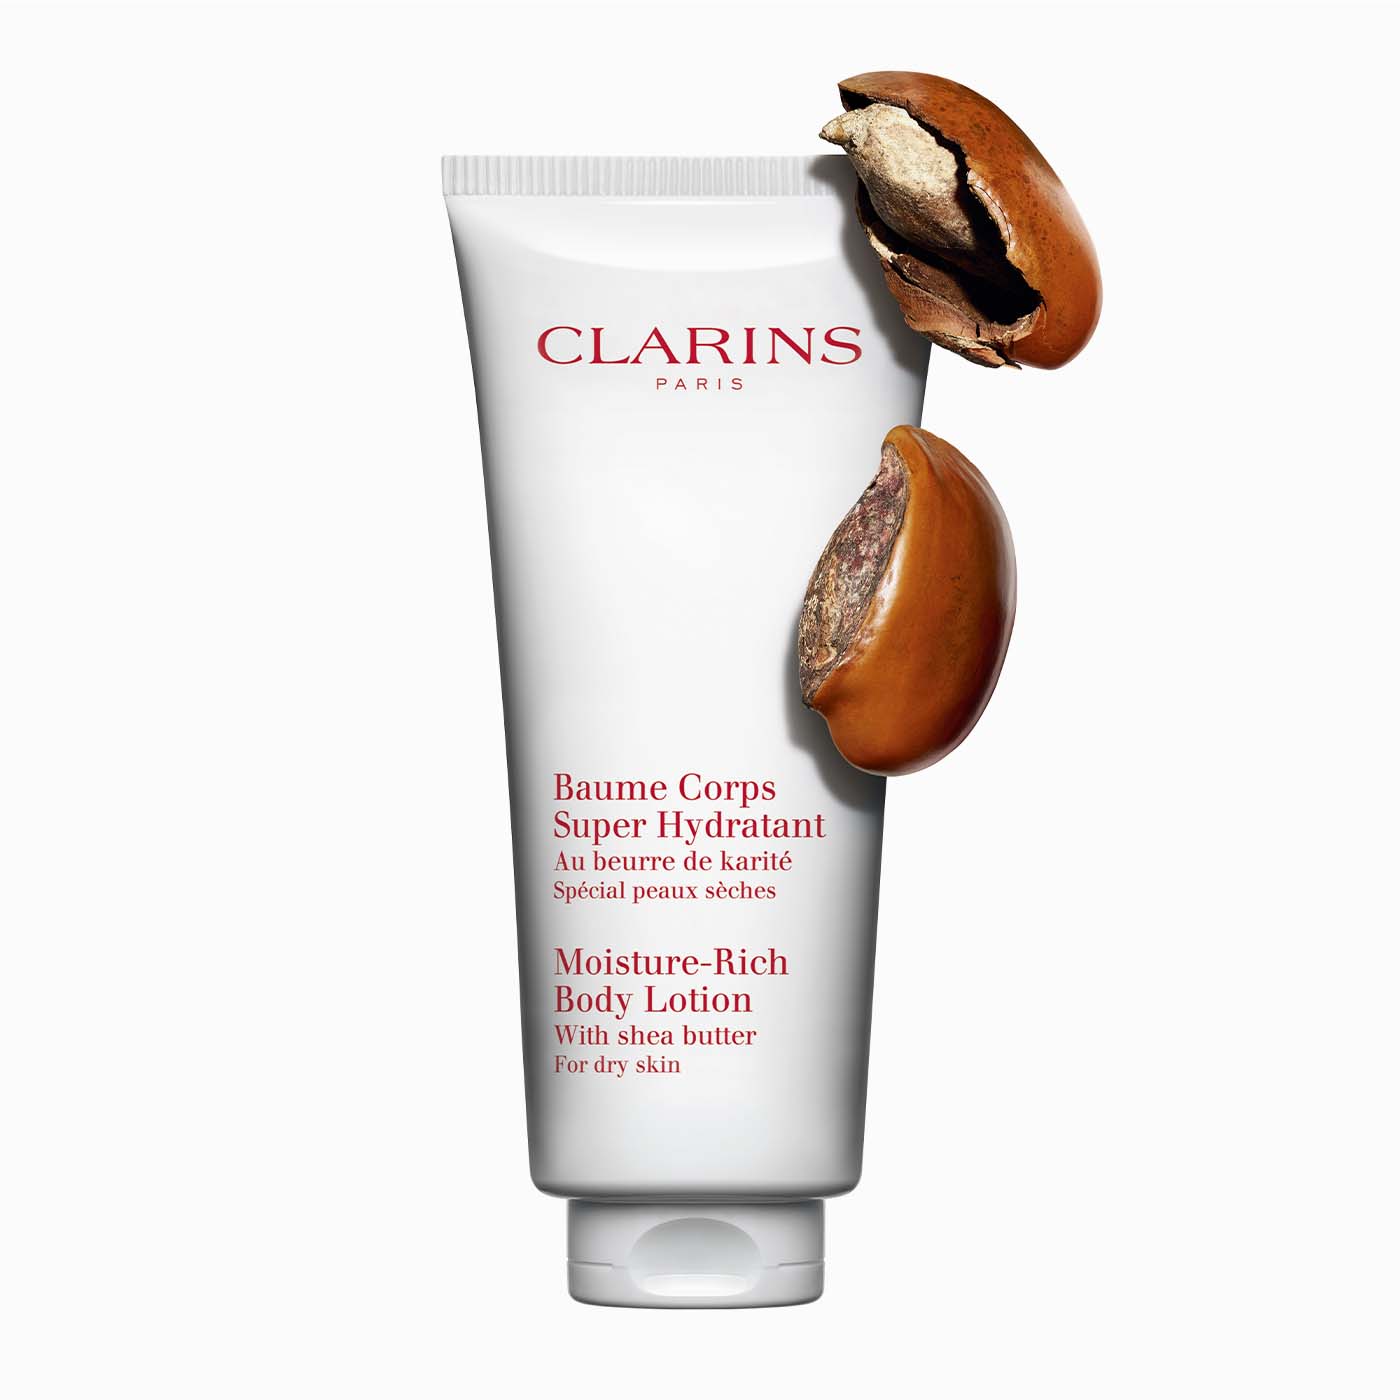 CLARINS® Lotion Non-Greasy Lotion | Body Luxury Moisture-Rich |